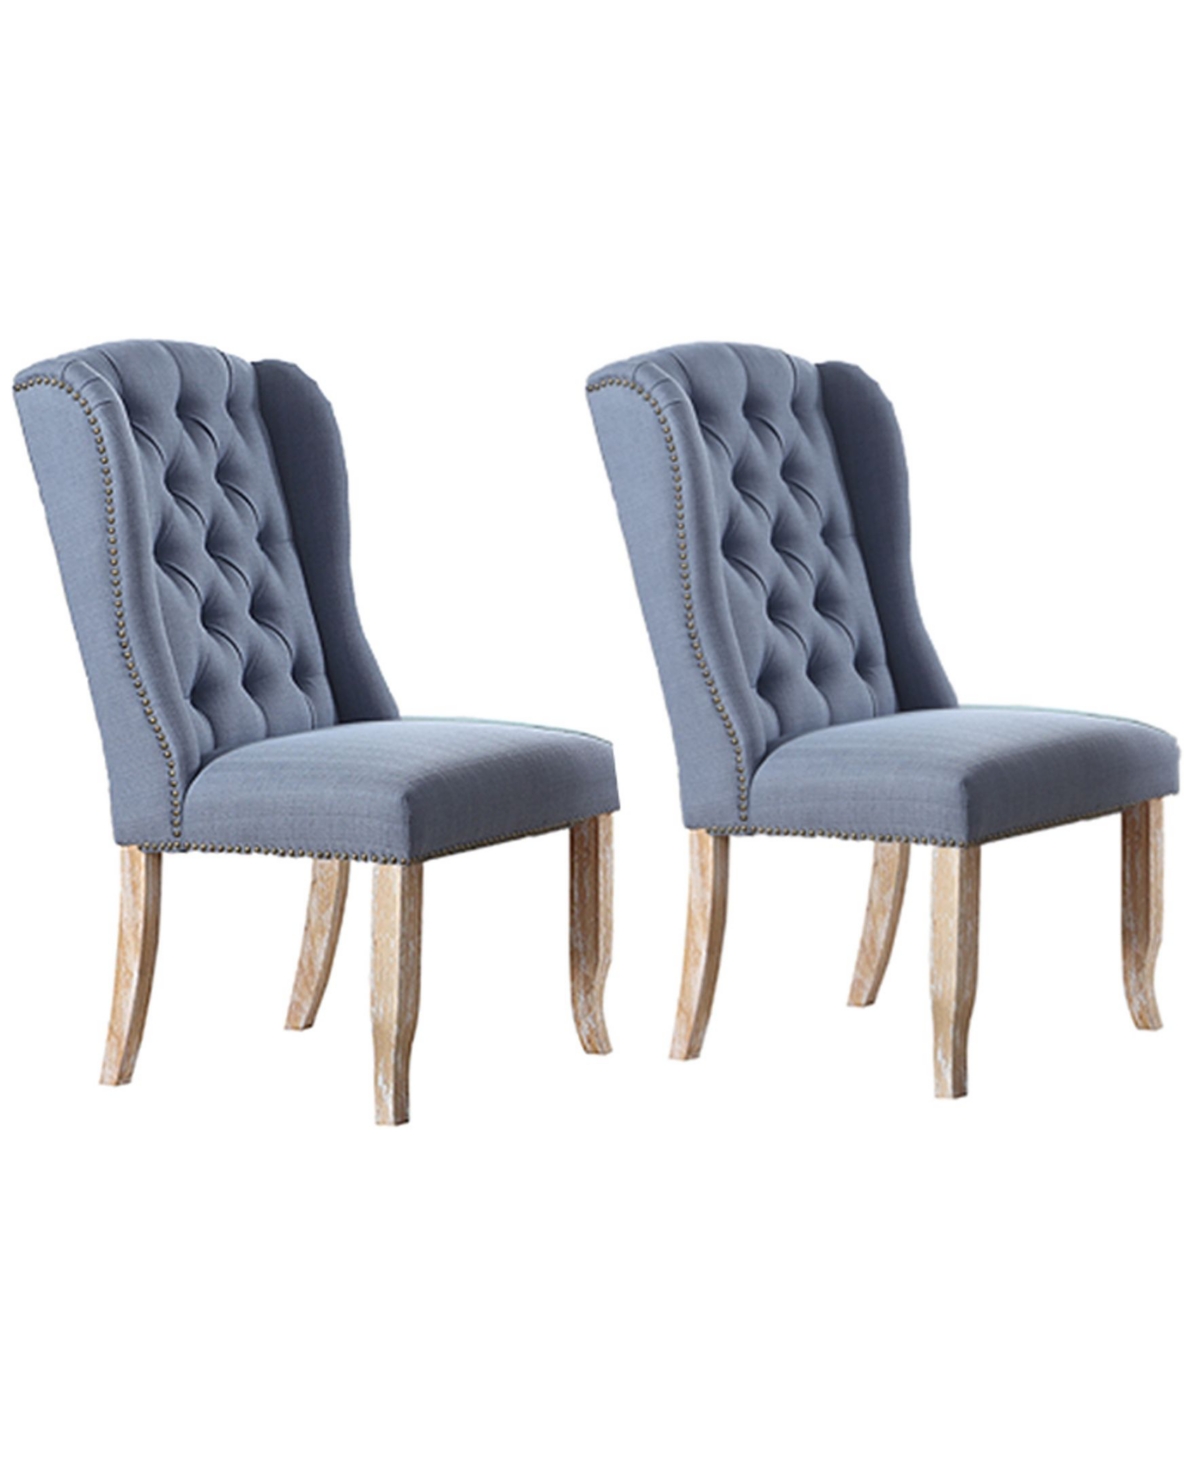 Best Master Furniture Huntington Upholstered Side Chairs With Tufted Back, Set Of 2 In Sea Blue